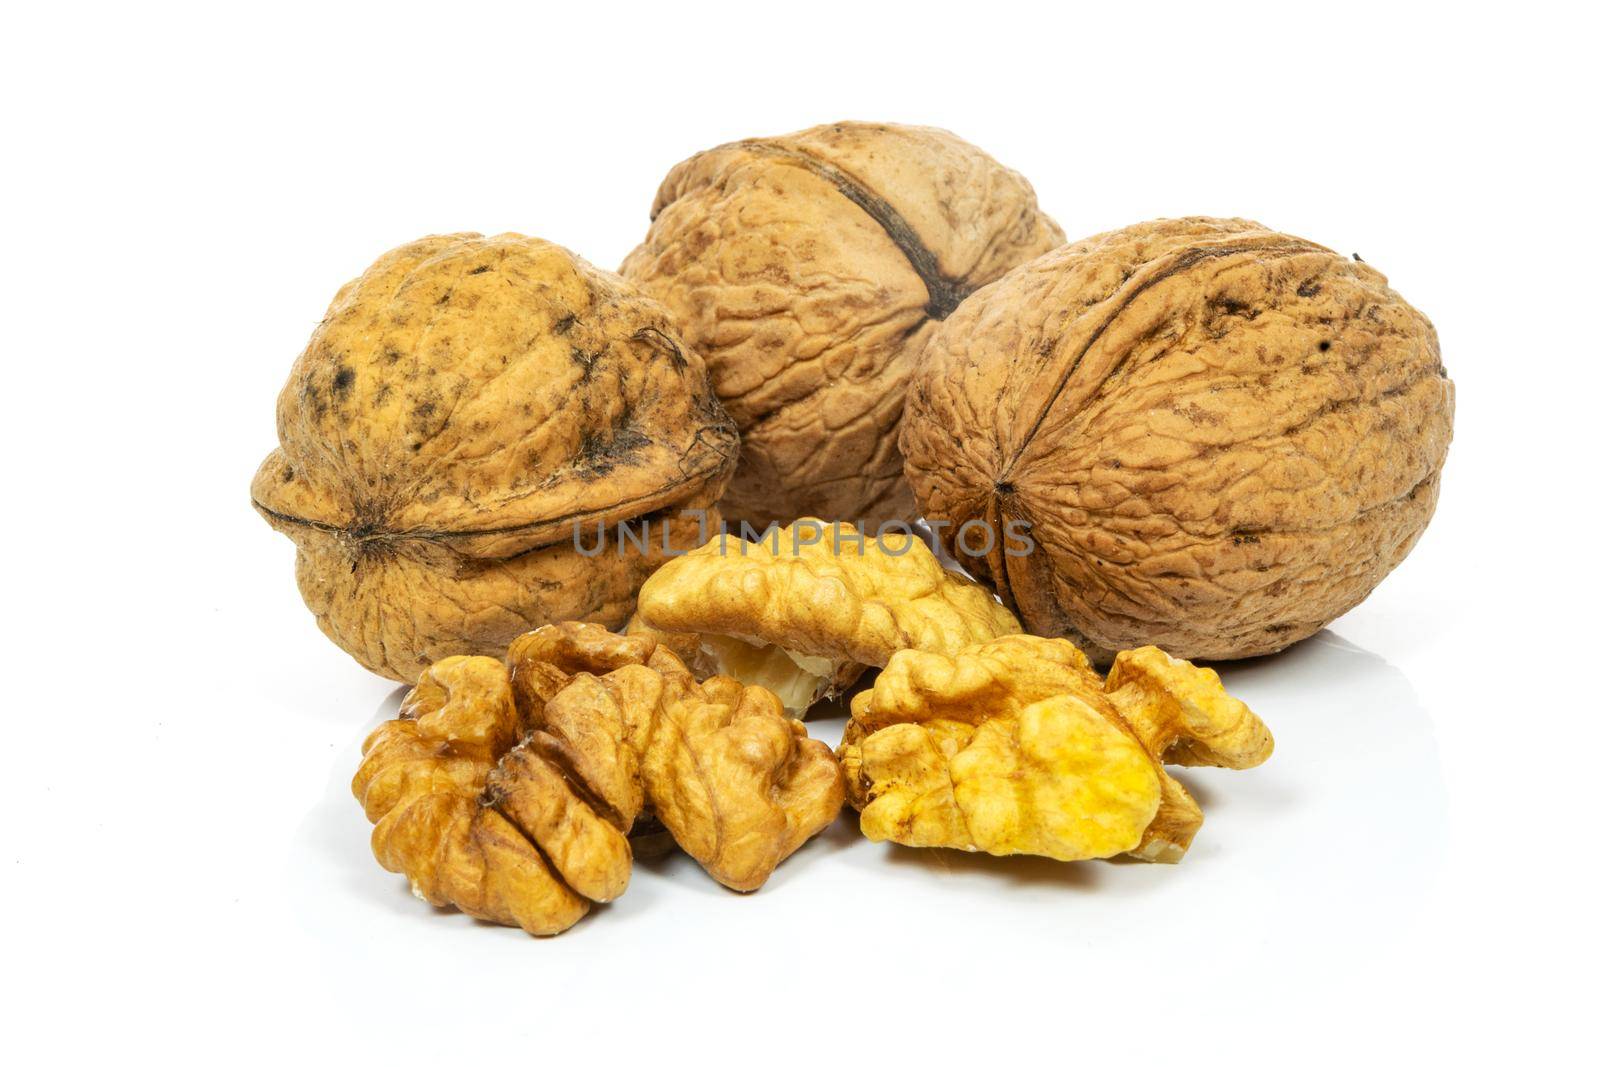 Group of whole shells and shelled walnuts isolated on white background